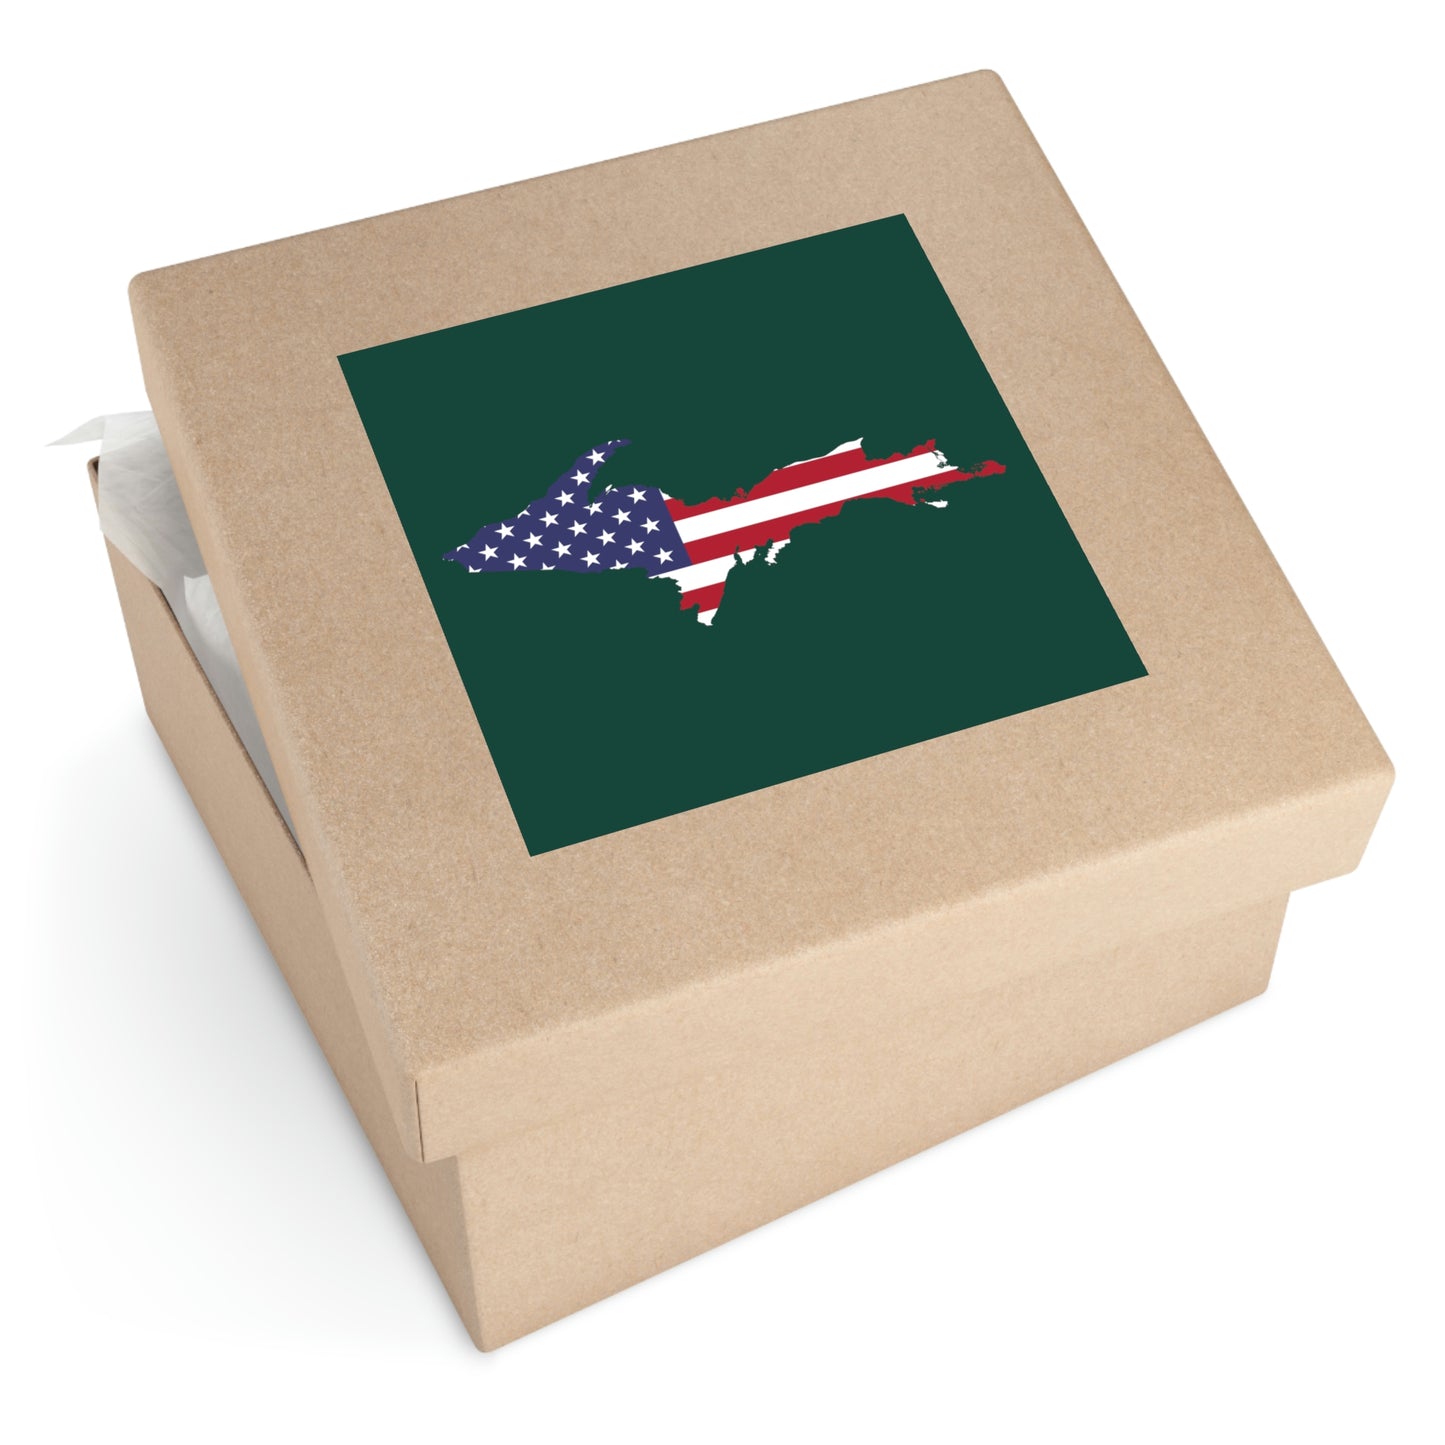 Michigan Upper Peninsula Square Sticker (Green w/ UP USA Flag Outline) | Indoor/Outdoor